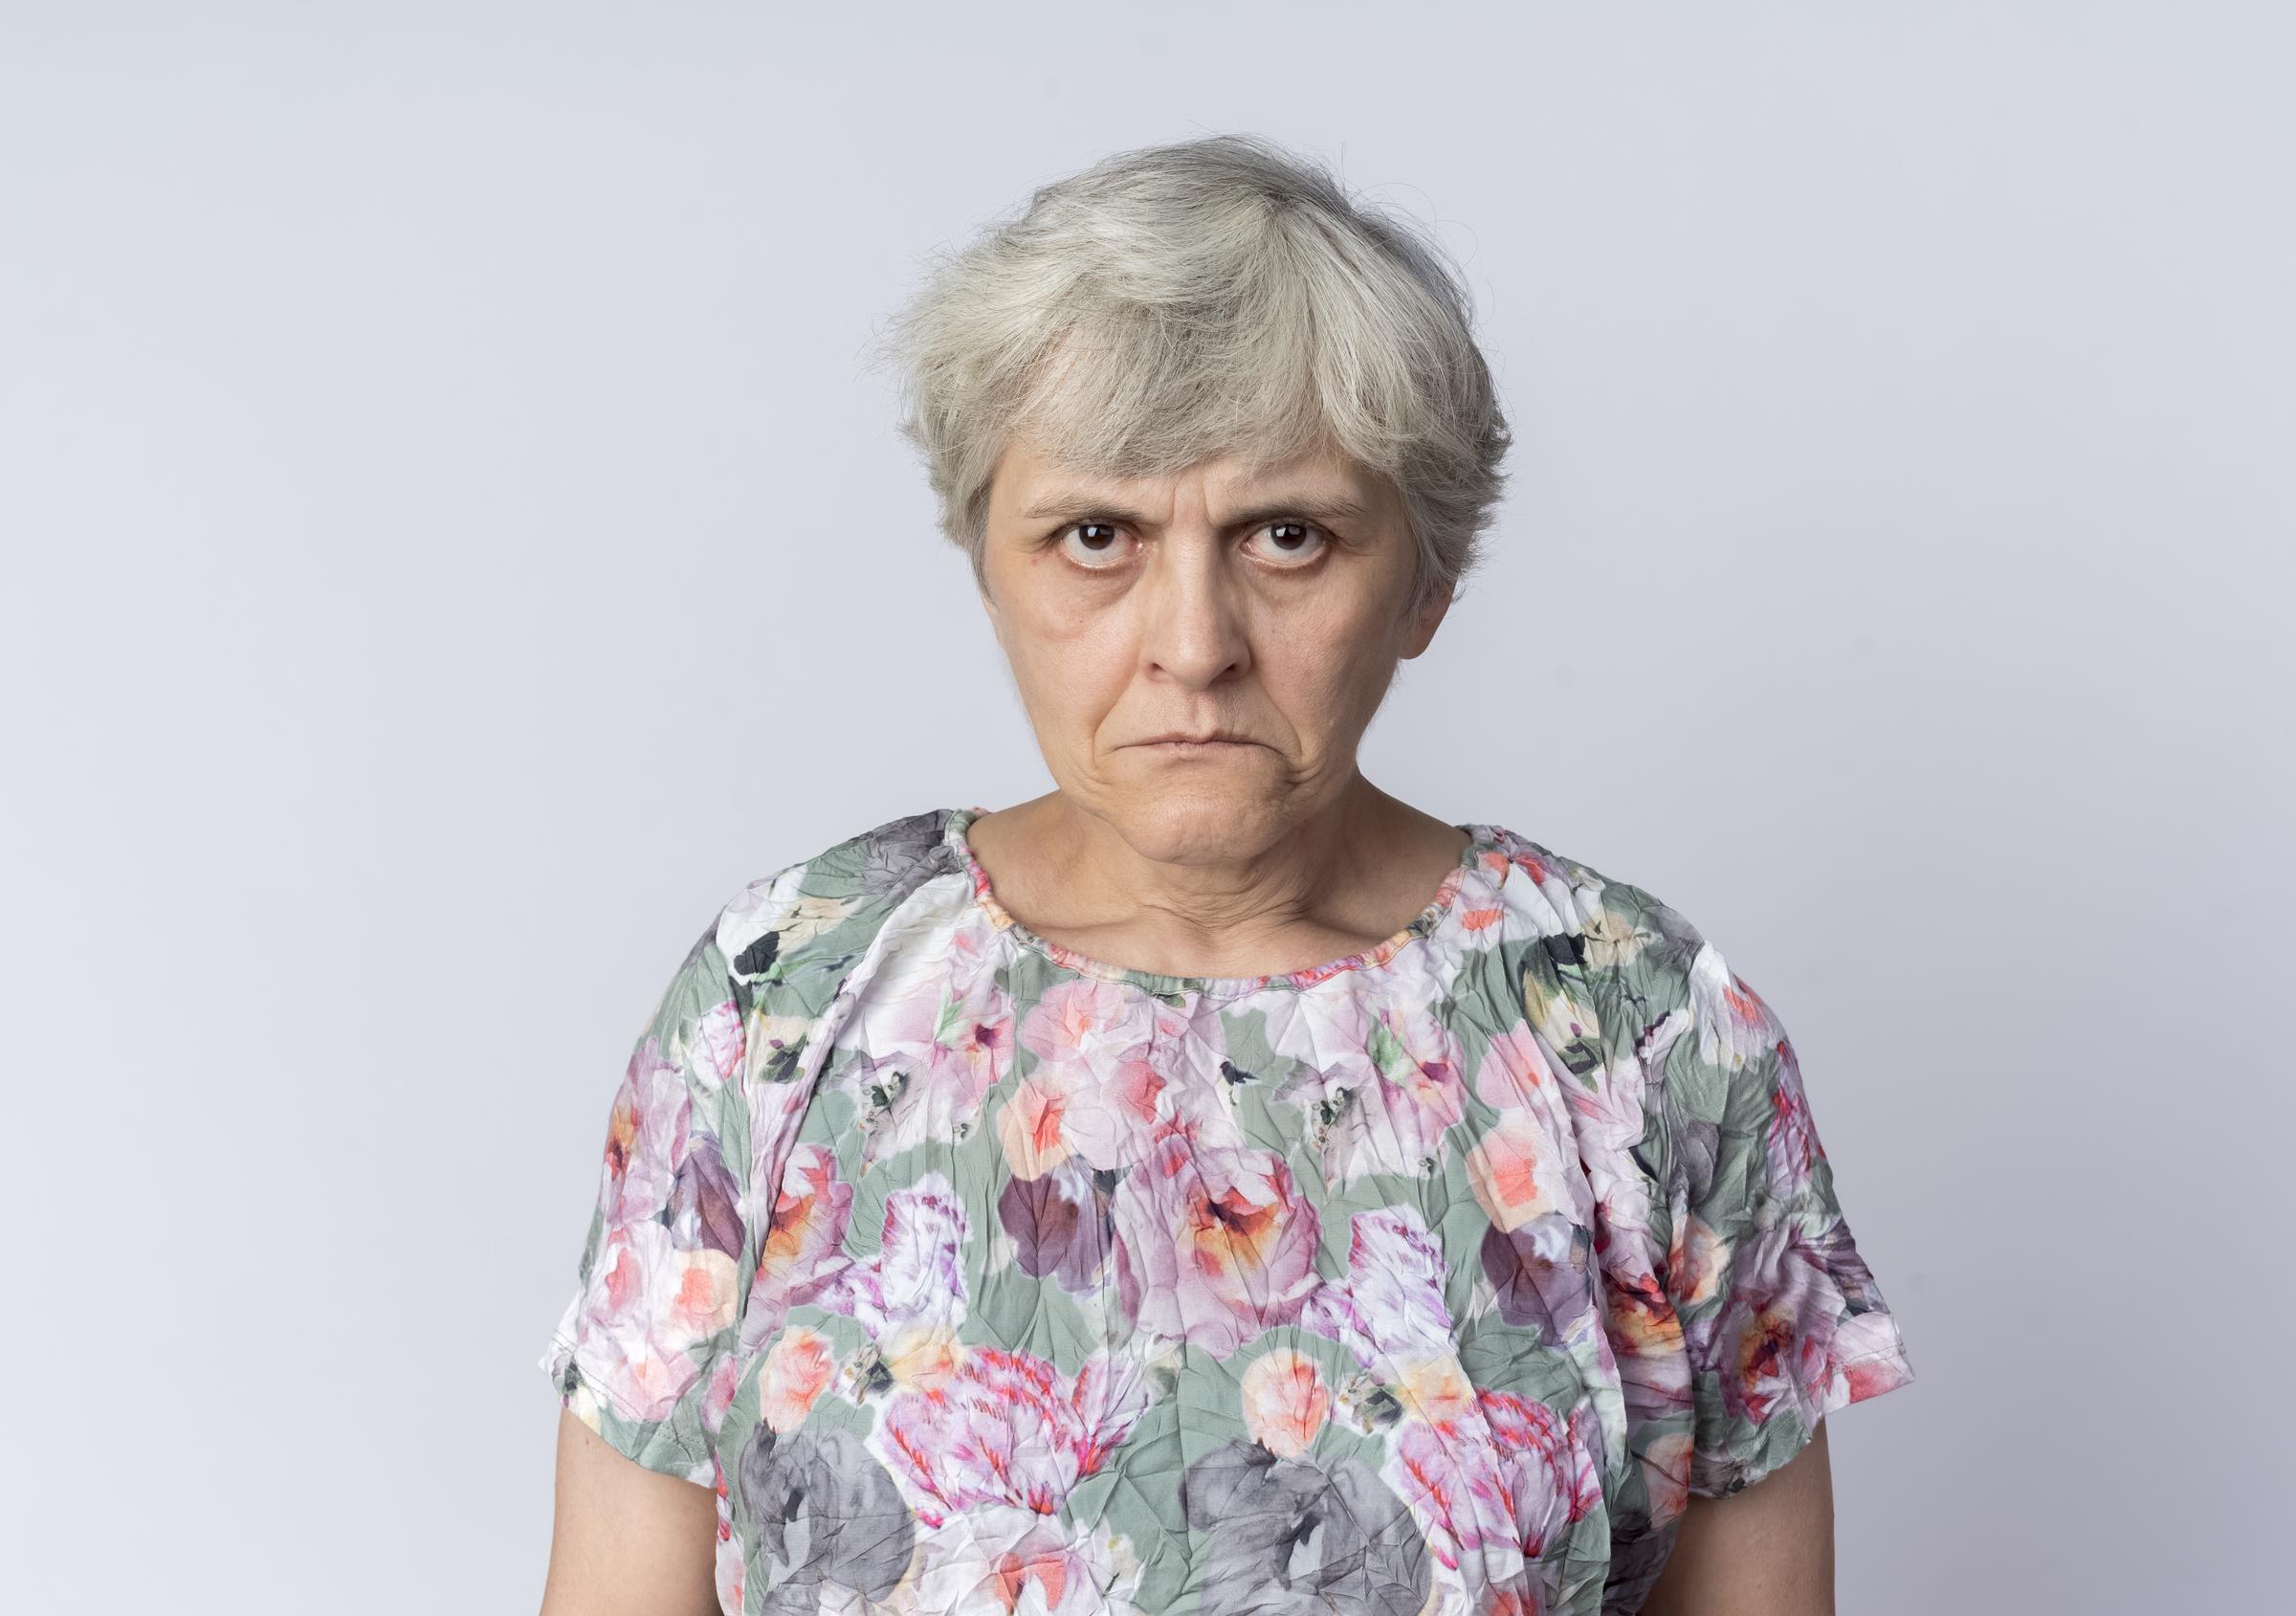 A frustrated older woman staring daggers | Source: Freepik